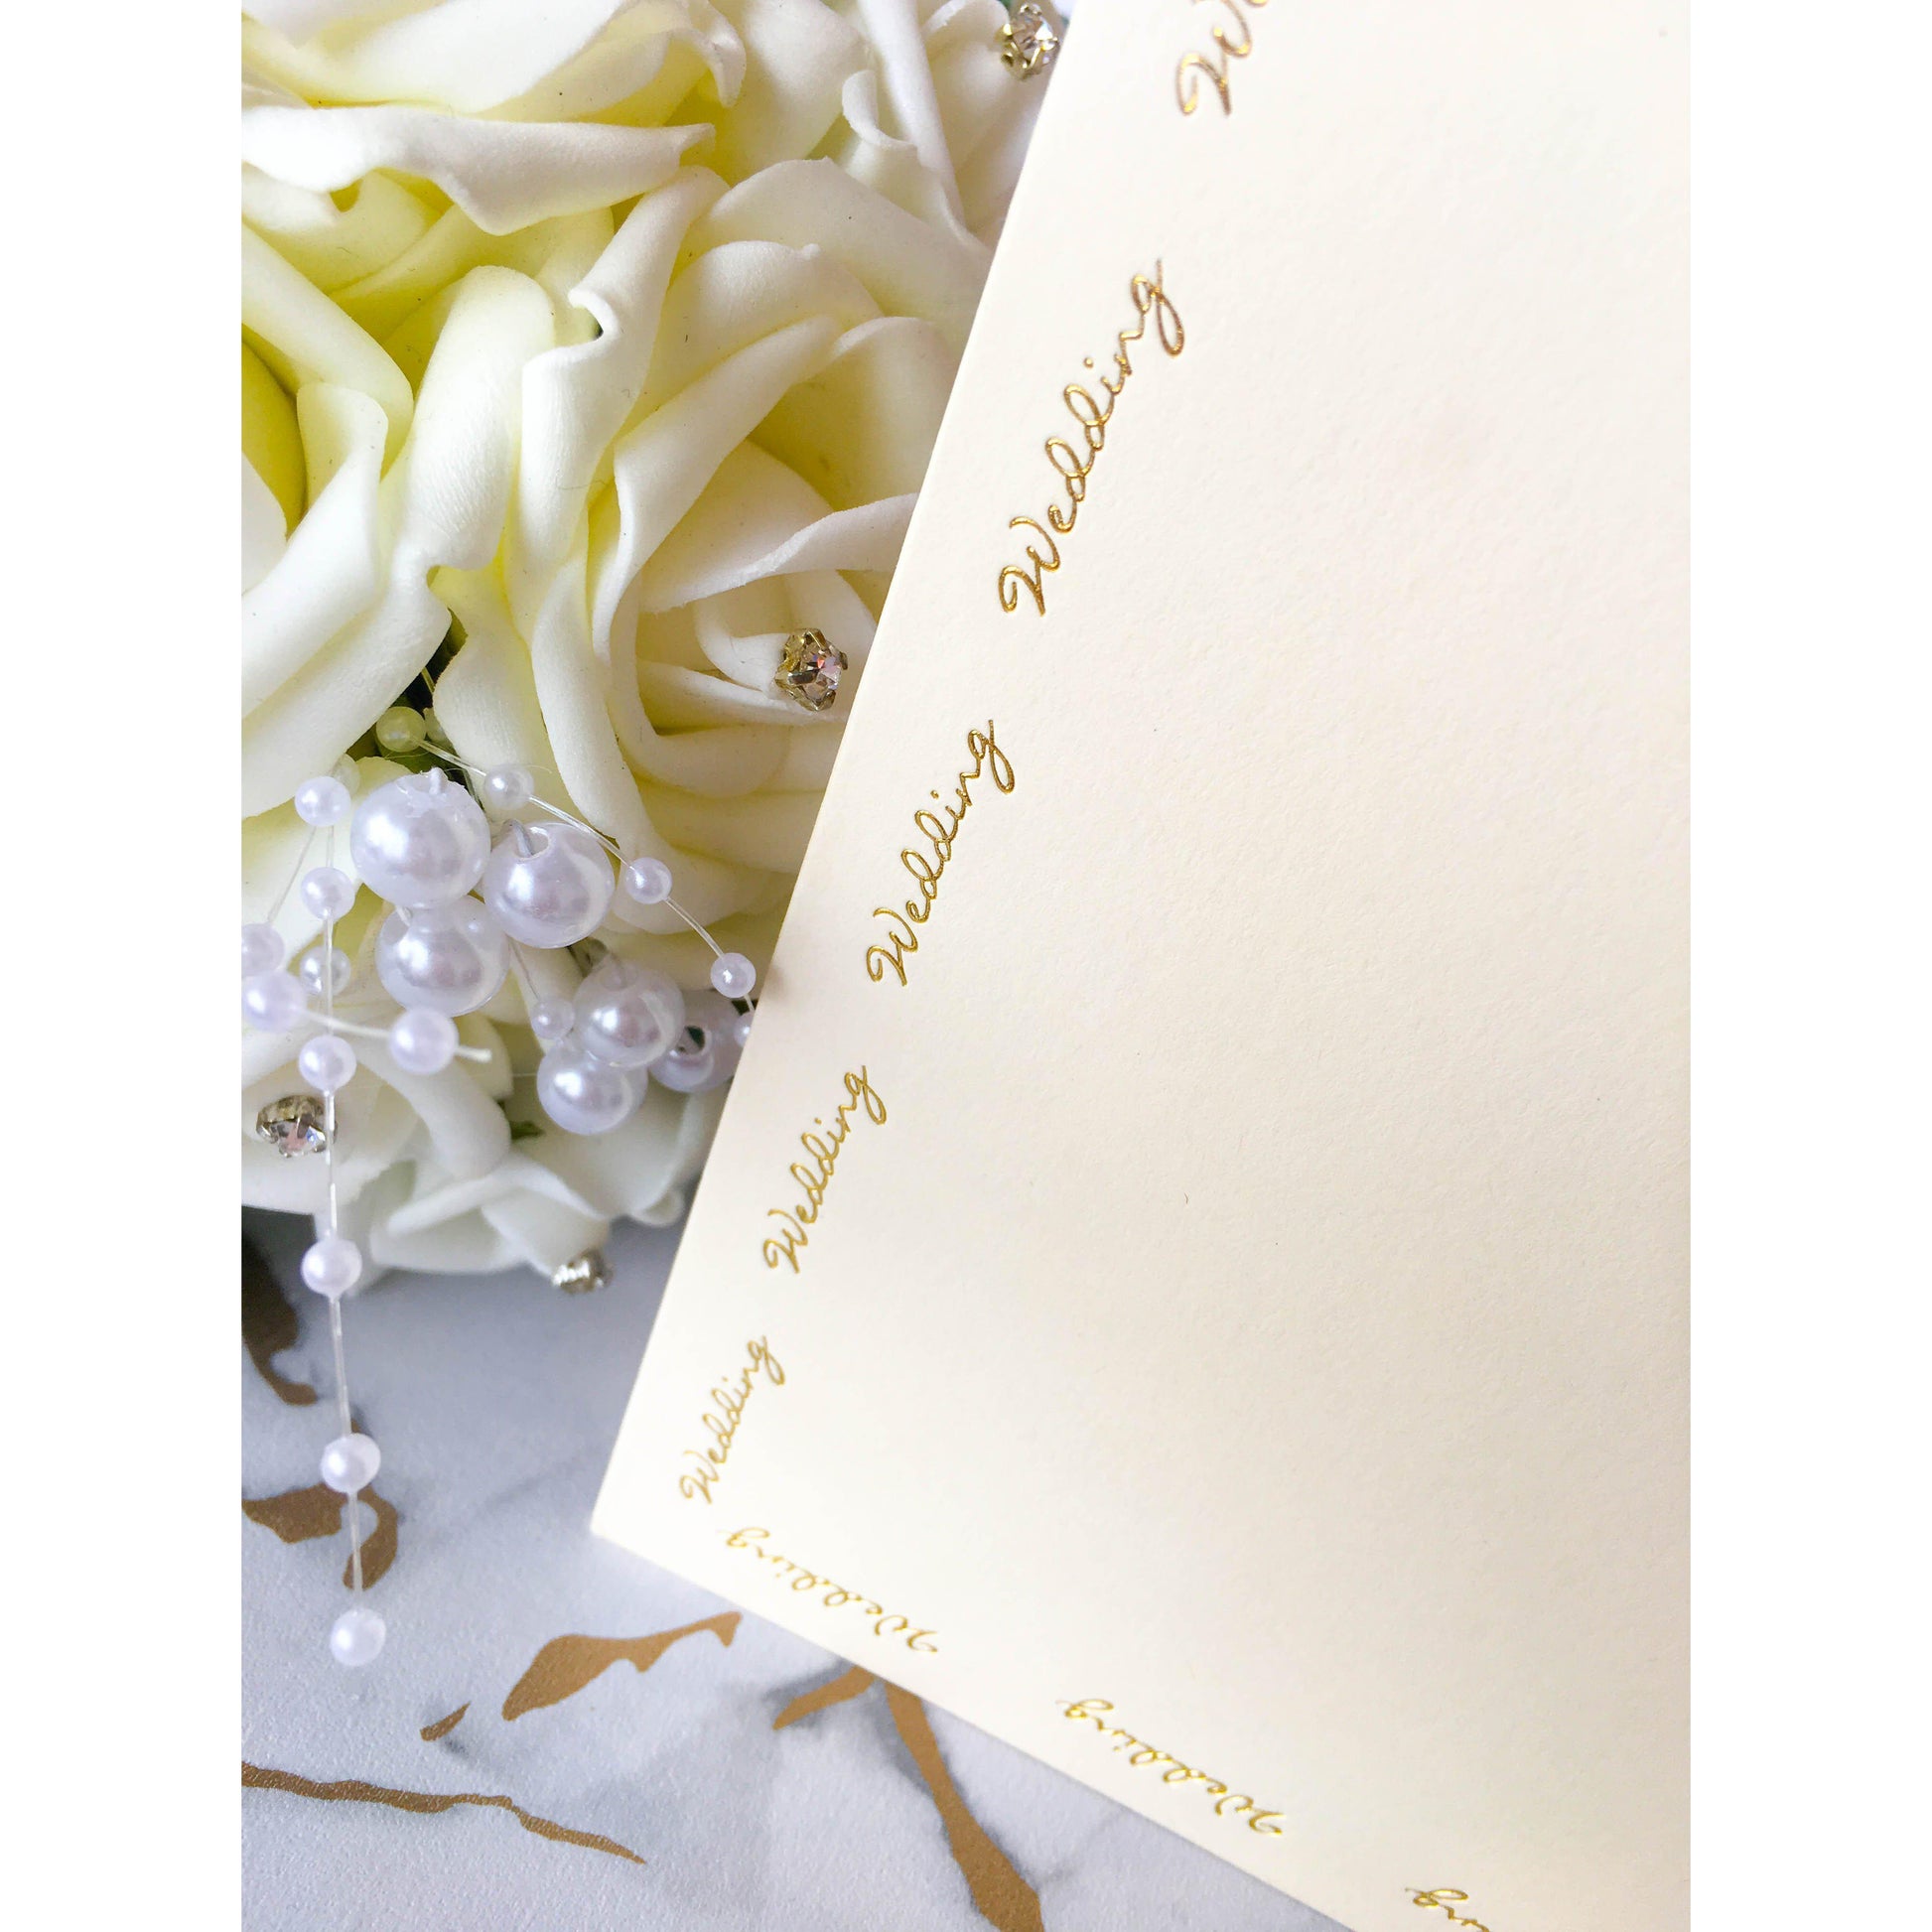 Tall DL Card Blanks Smooth Ivory With Gold Foil Wedding Script 10pk - Clearance-The Creative Bride